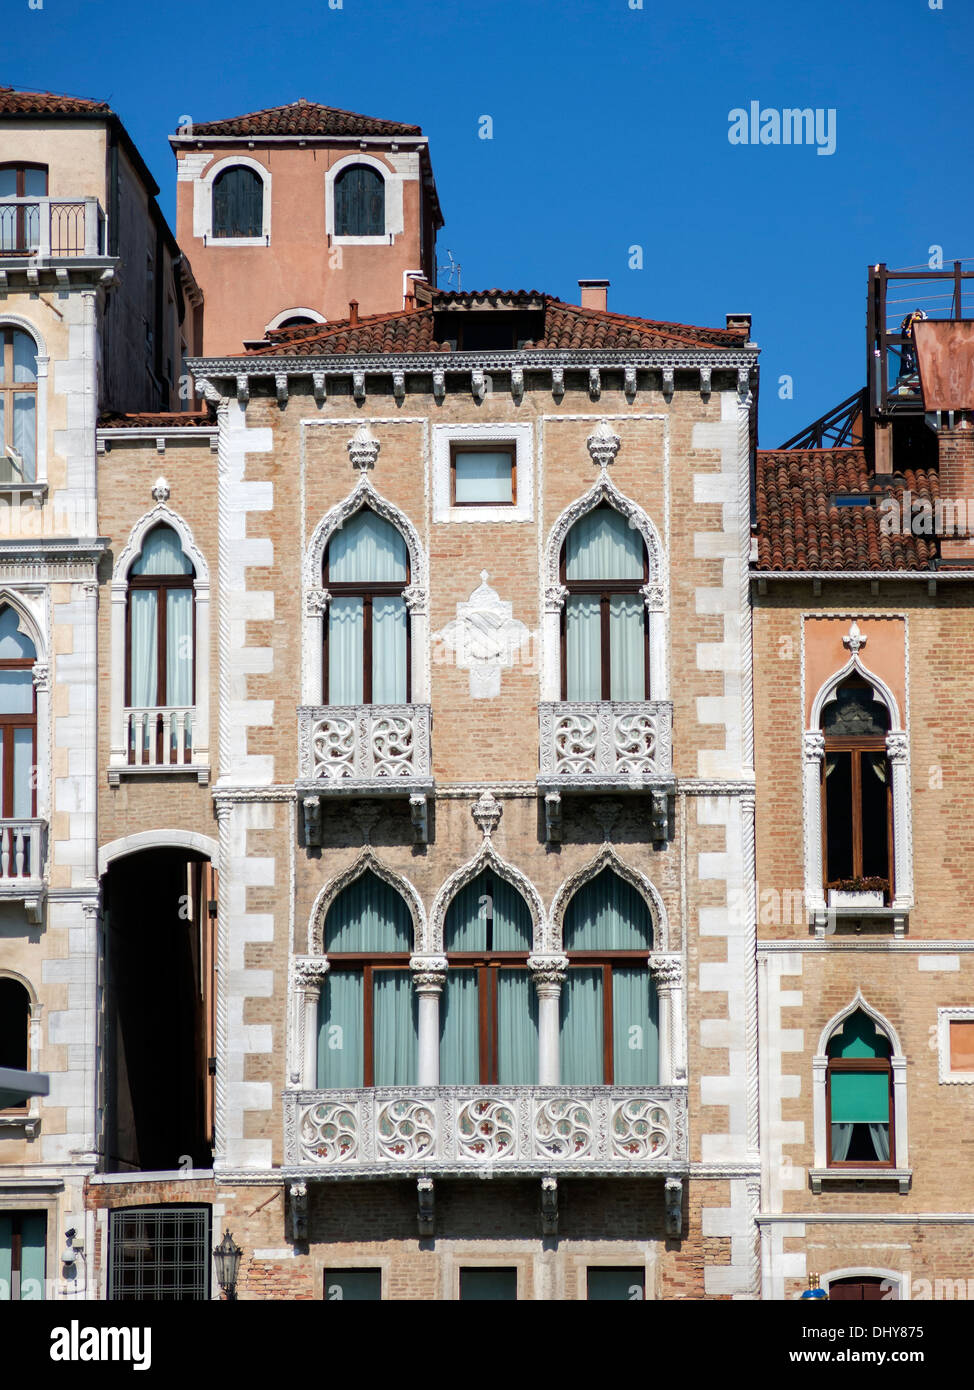 Building facade with decorated white stone ogee arch windows and ornate stone balconies, Venice, Italy. Stock Photo